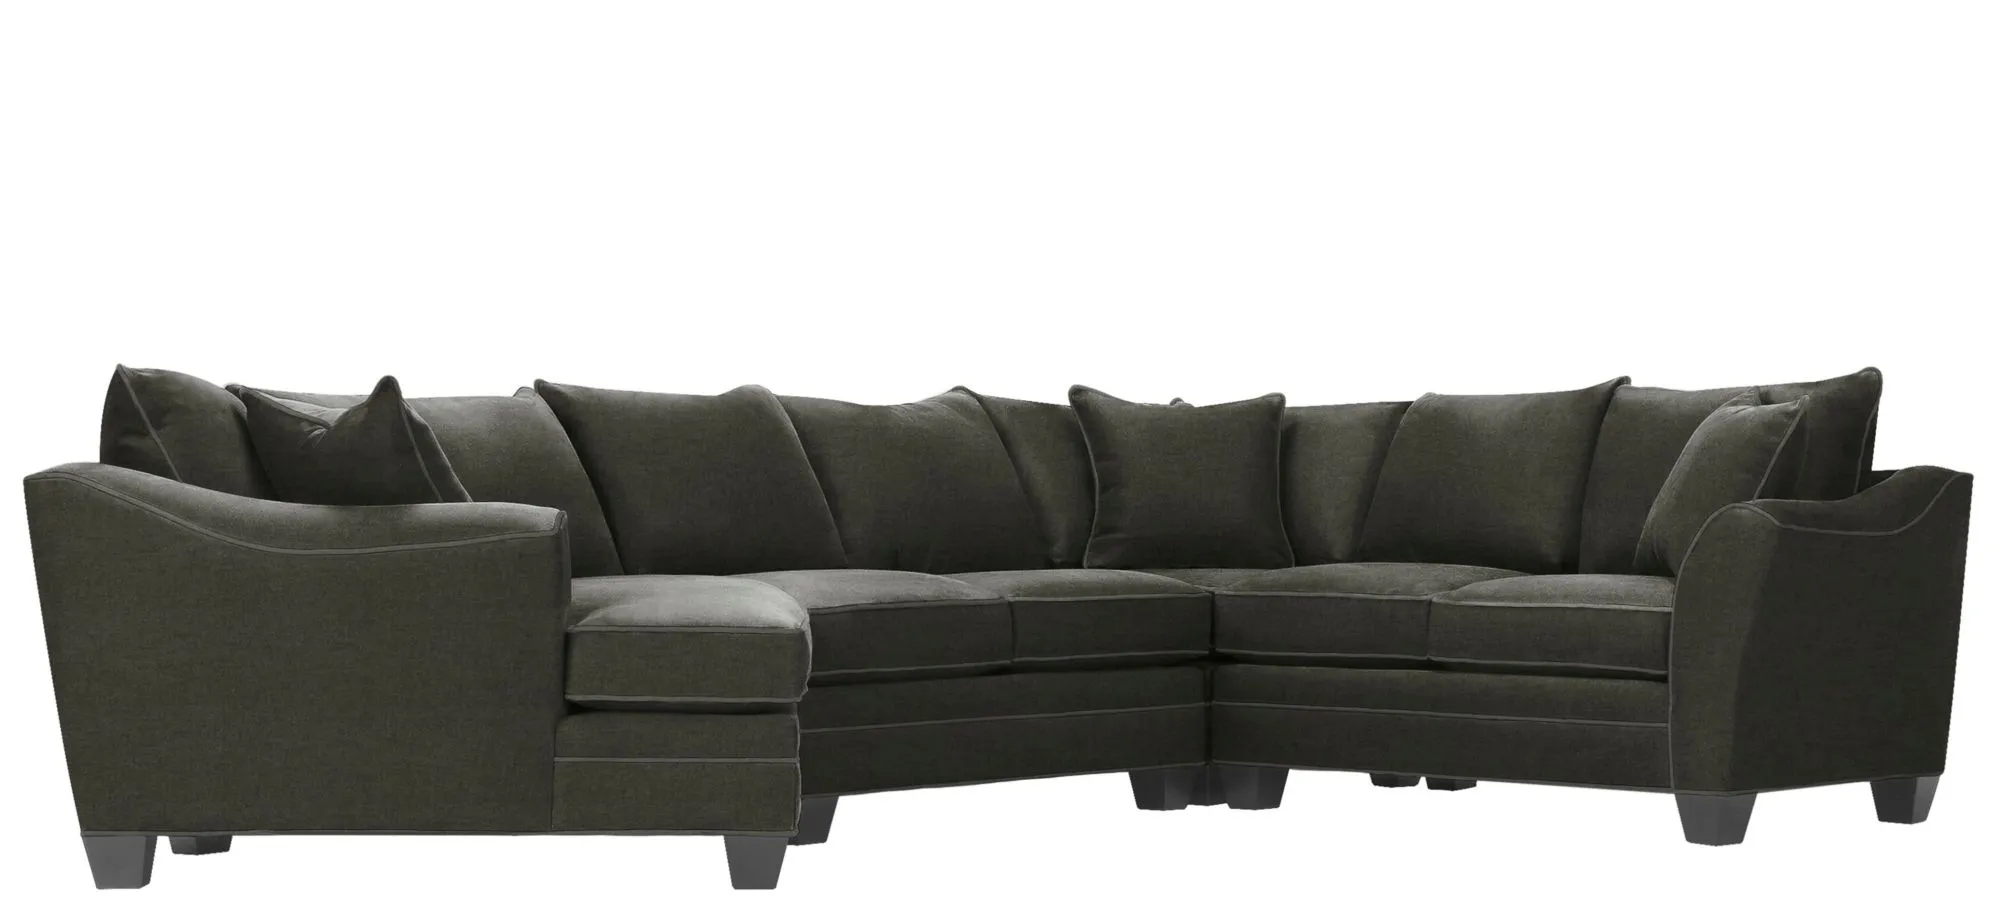 Foresthill 4-pc. Left Hand Cuddler with Loveseat Sectional Sofa in Santa Rosa Slate by H.M. Richards